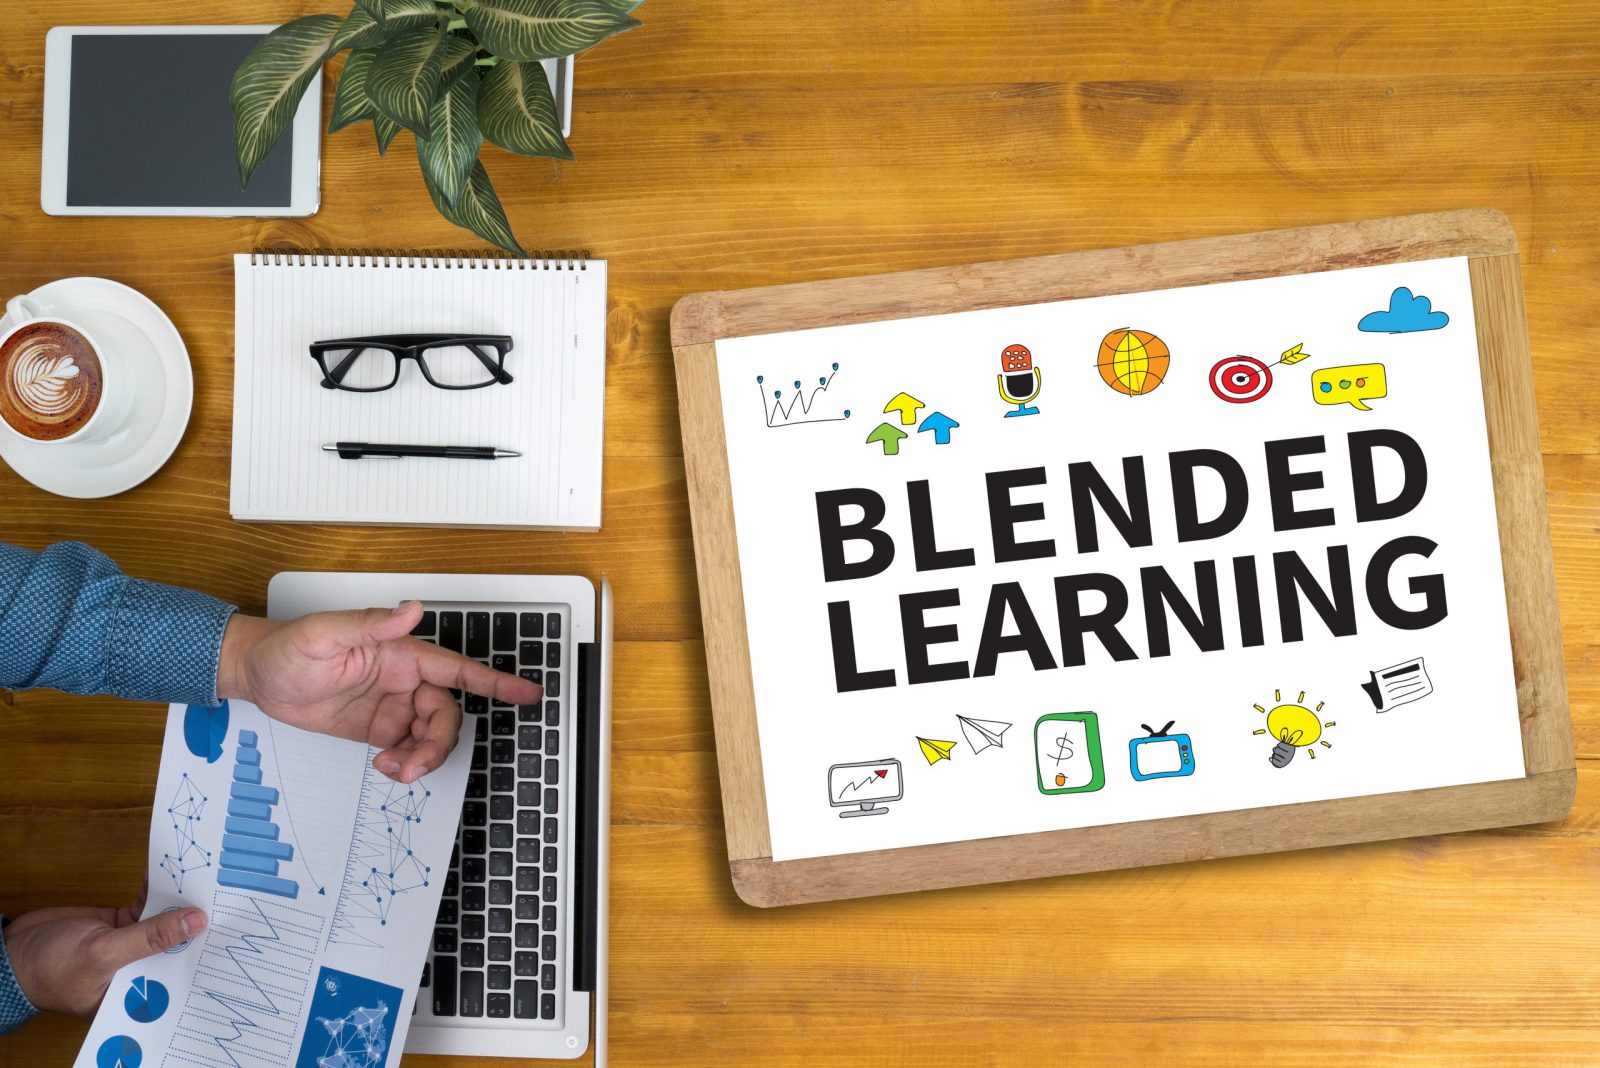 Is Blended Learning the Right Approach for Your Enterprise?